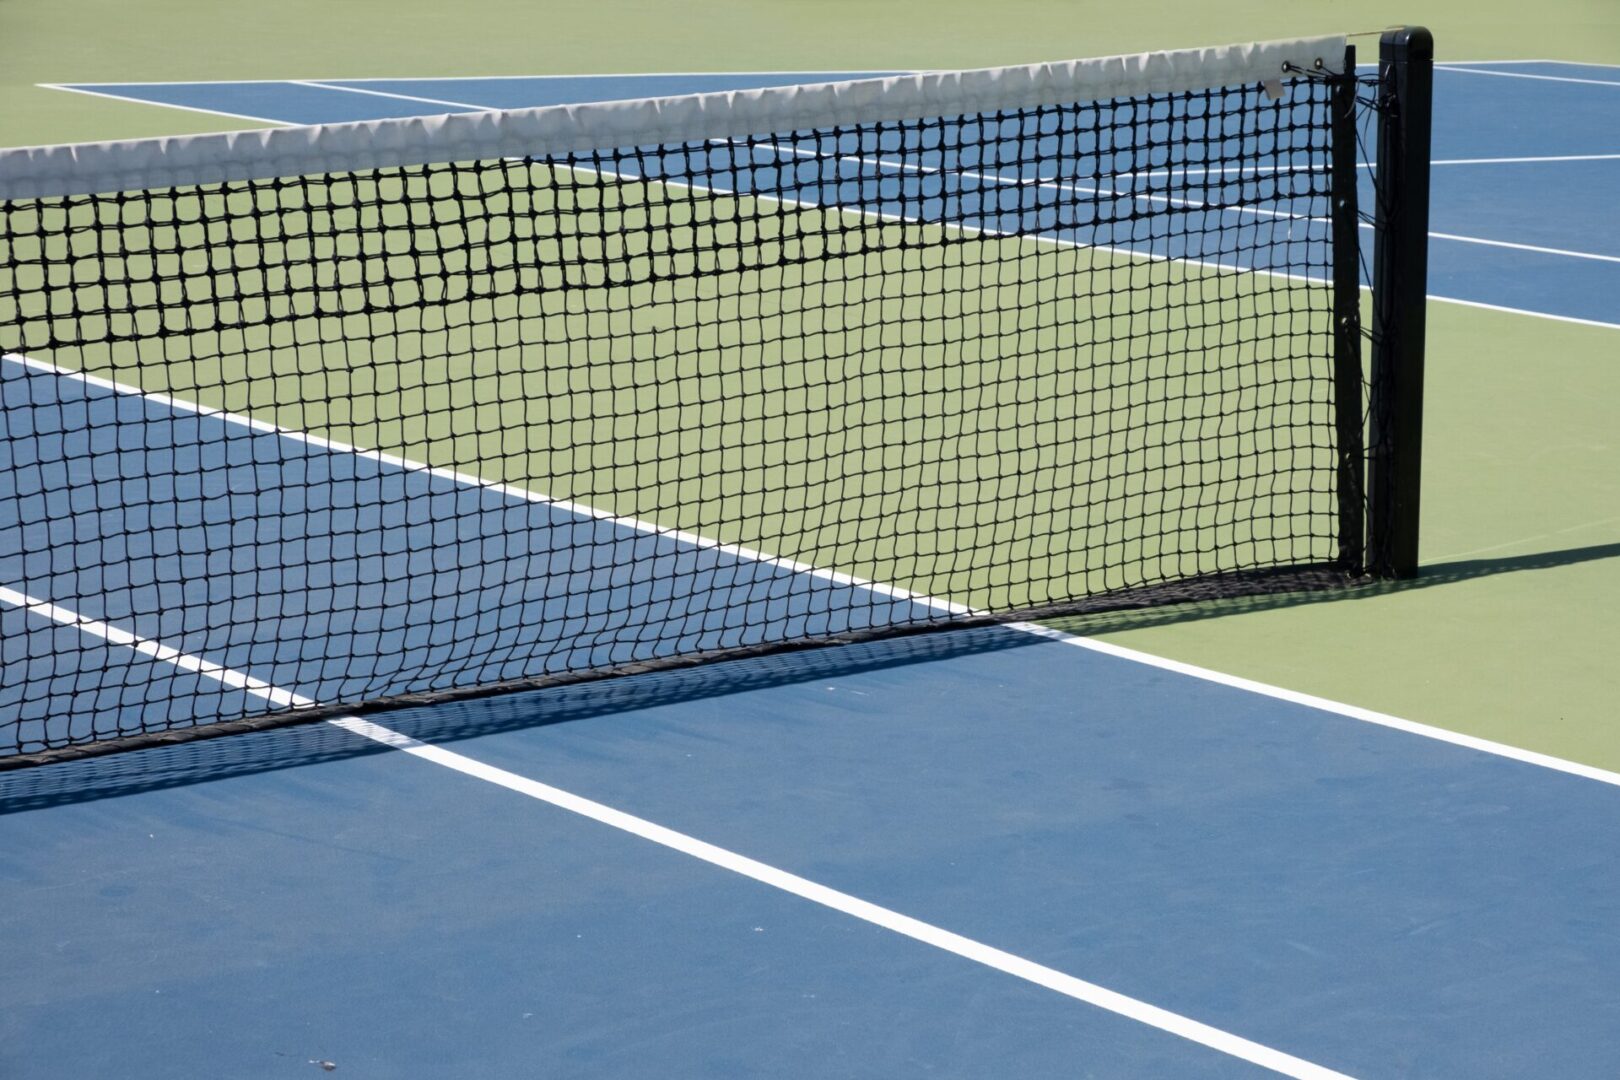 A tennis court with a net and the blue line.